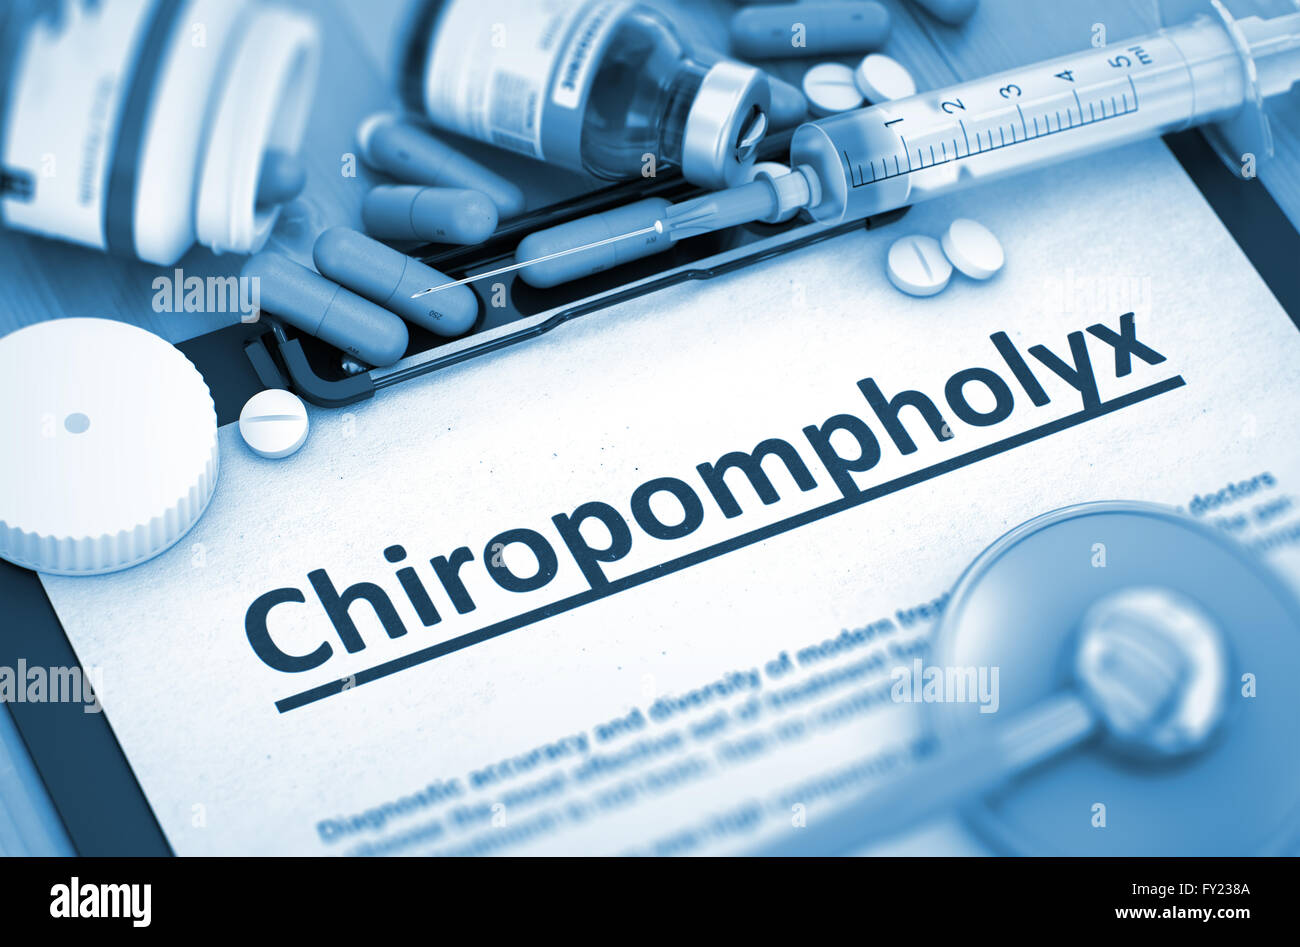 Chiropompholyx - Medical Concept. Stock Photo